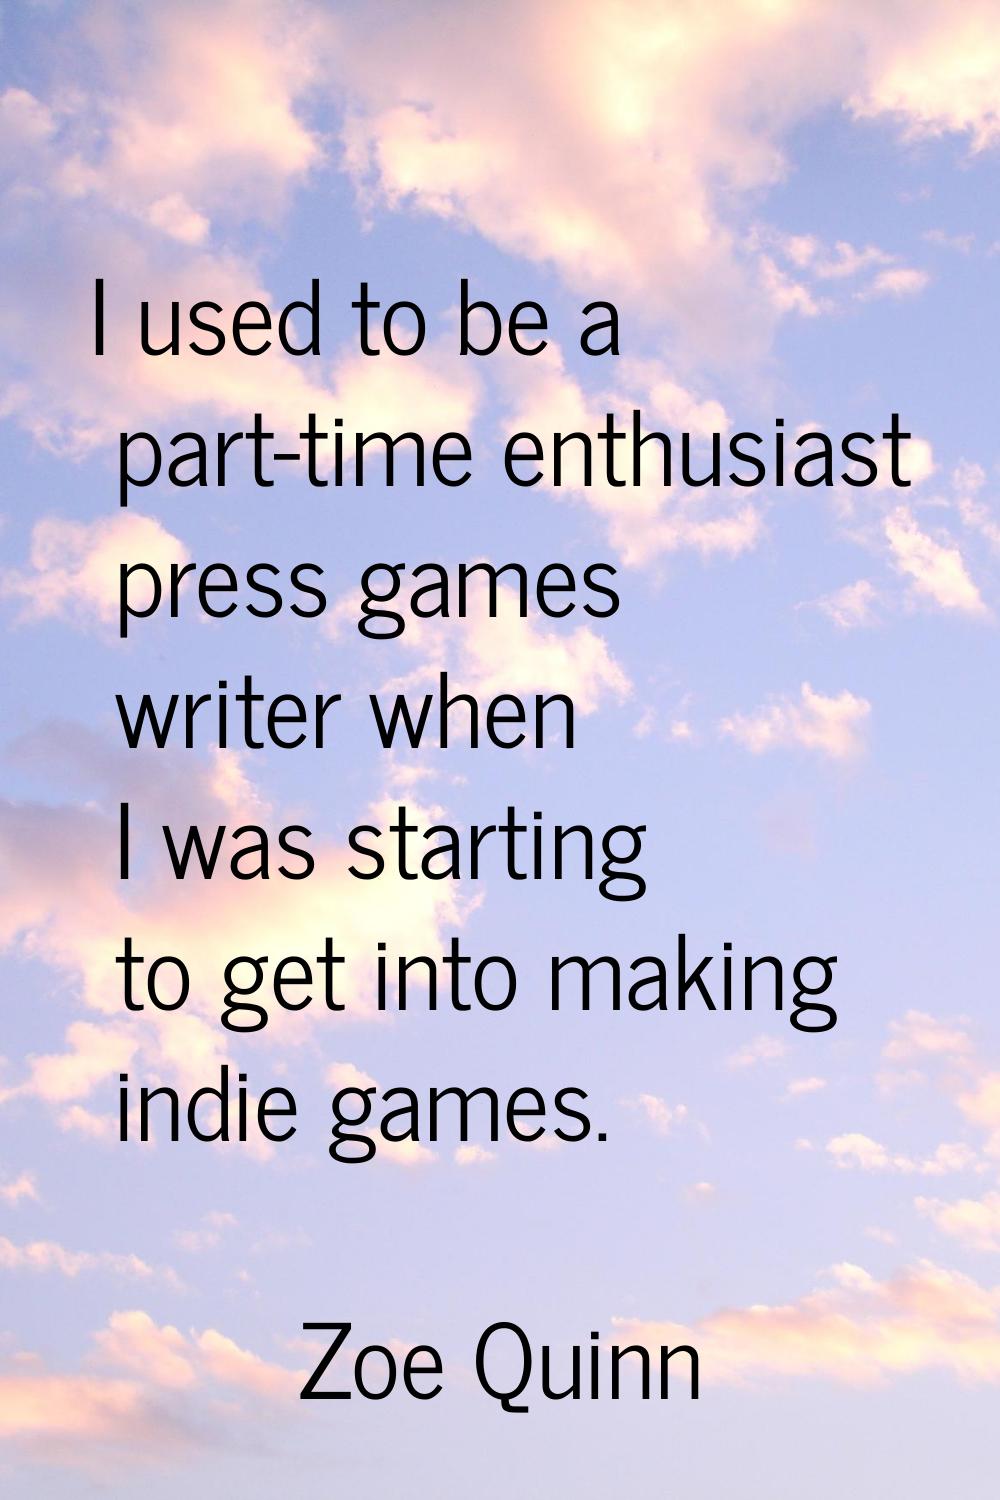 I used to be a part-time enthusiast press games writer when I was starting to get into making indie